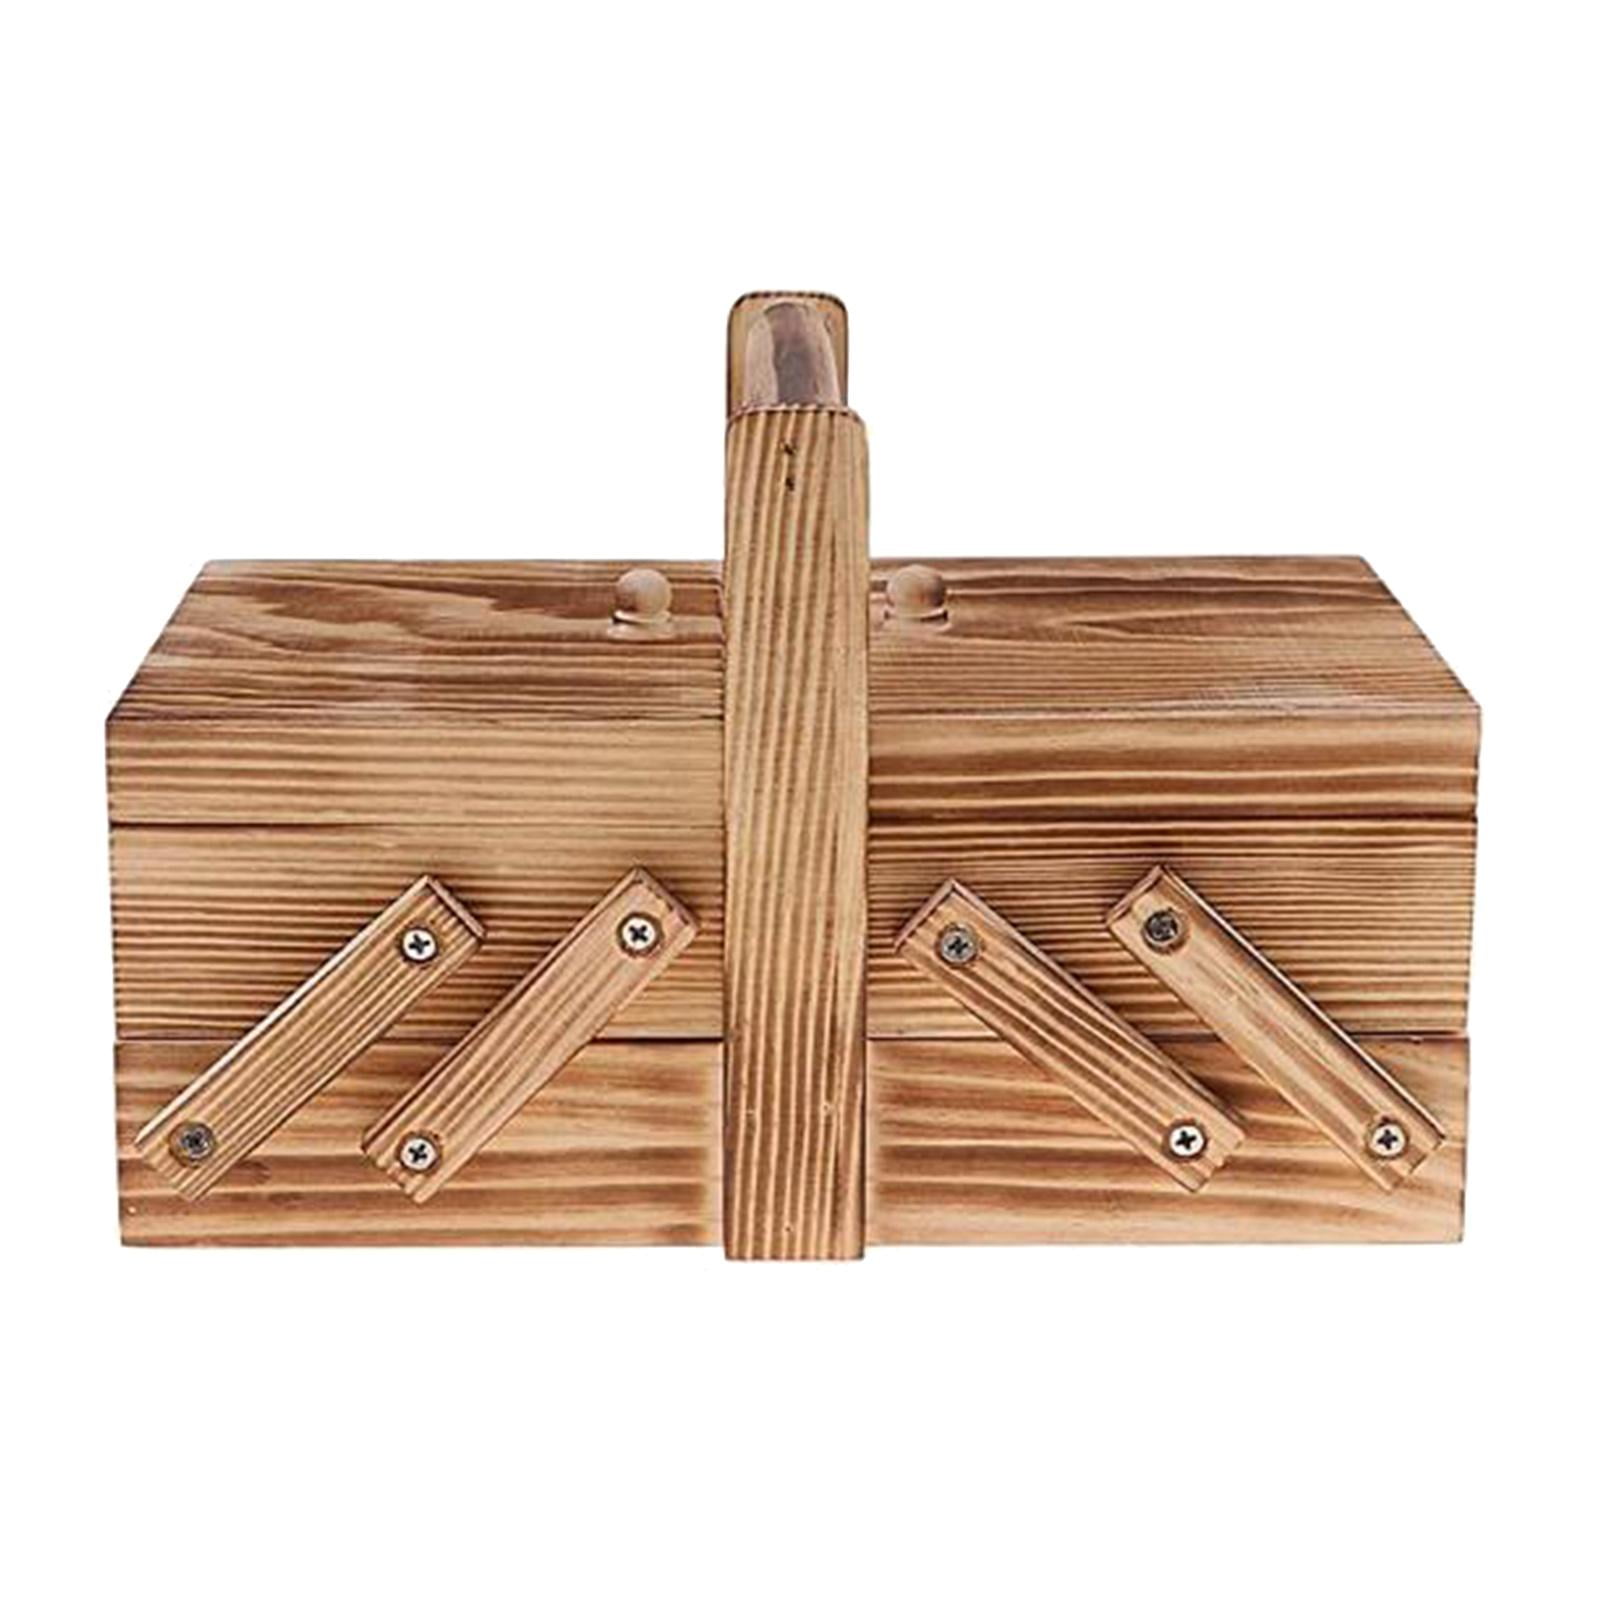 Wooden Sewing Box Sewing Accessories Storage Case for Sewing